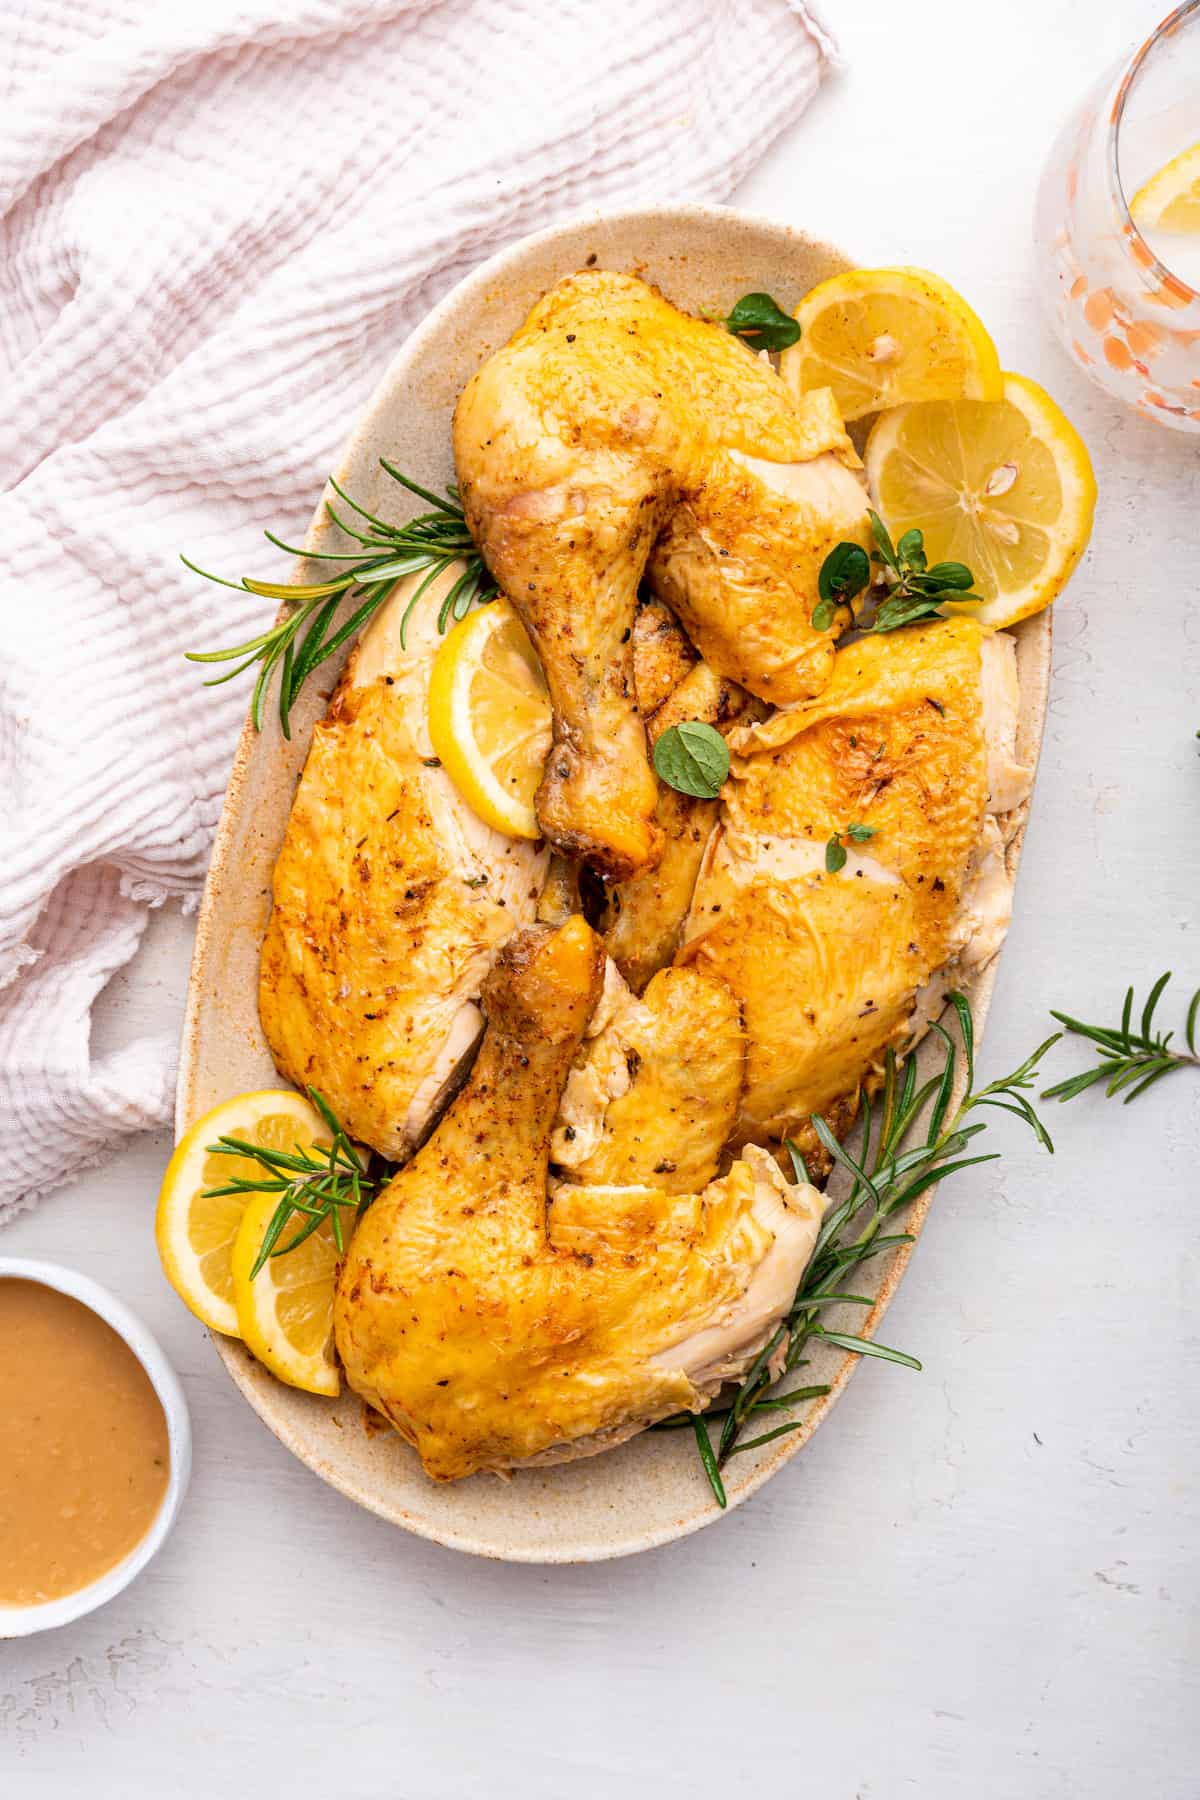 Overhead view of Instant Pot whole chicken on platter with lemon slices and rosemary sprigs